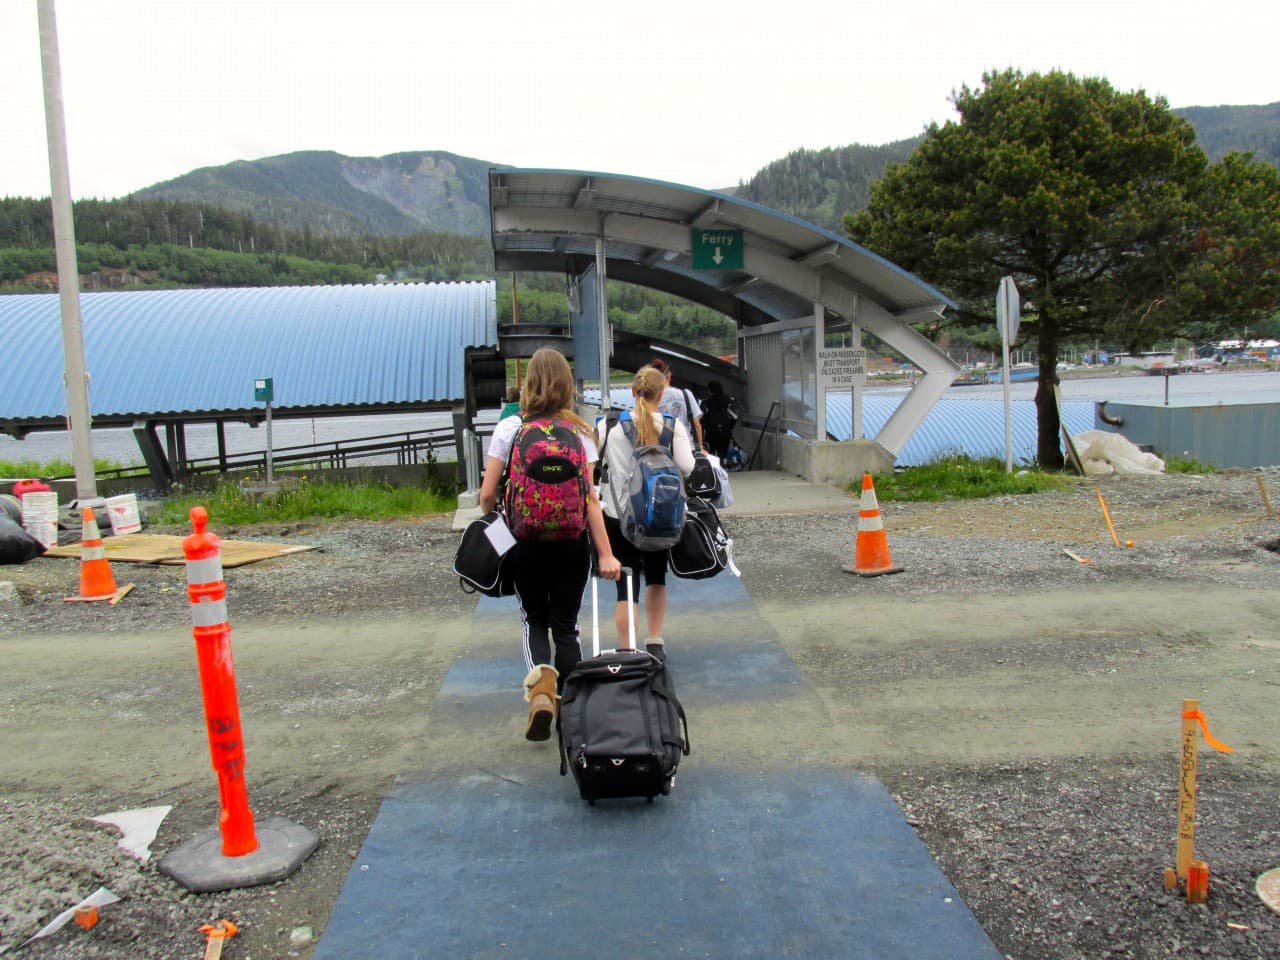 The Lady Kings land in Ketchikan, and head to ferry that connects the airport with the town. (Emily Files)